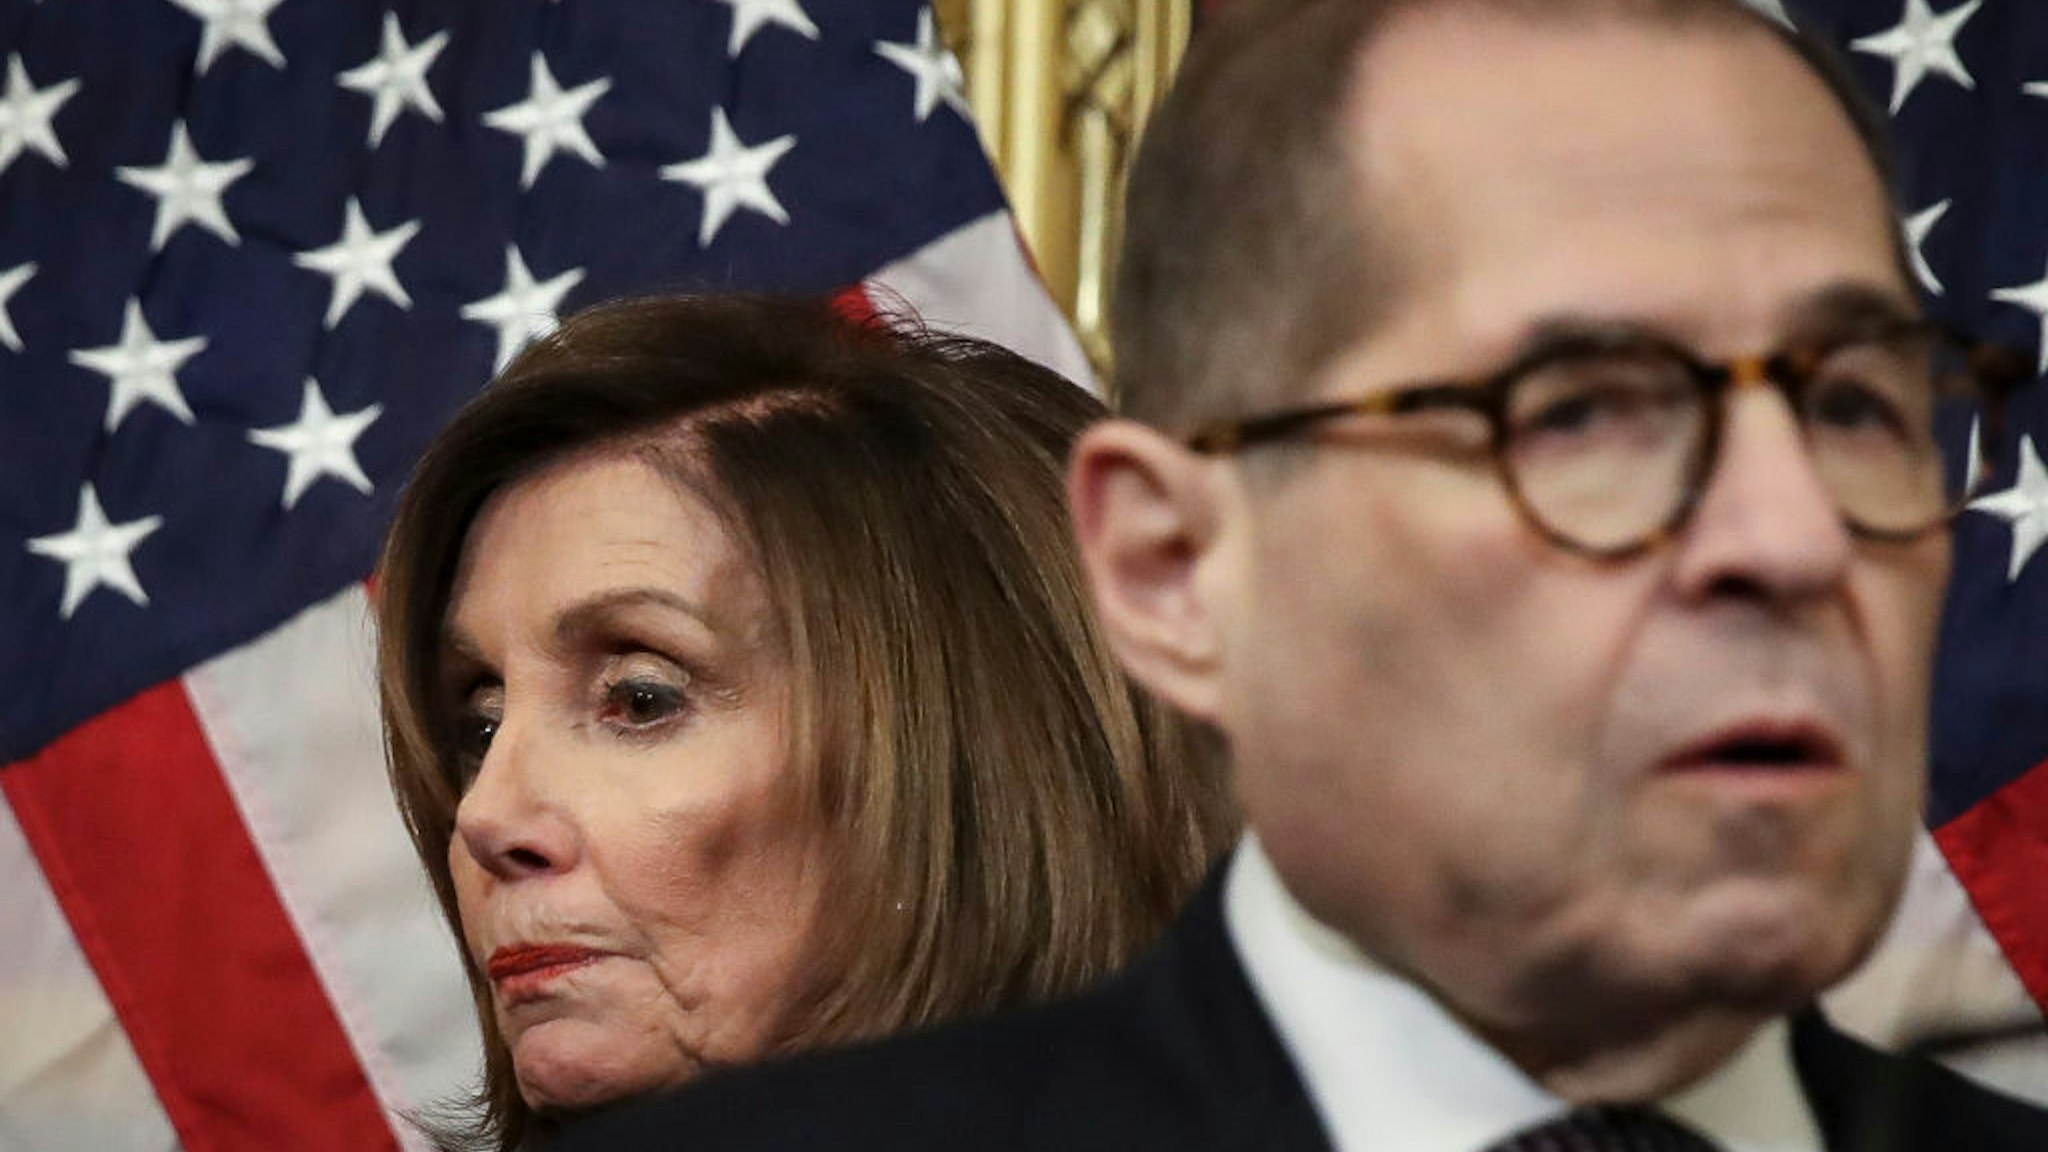 WASHINGTON, DC DECEMBER 18: (L-R) Speaker of the House Nancy Pelosi (D-CA) and Chairman of House Judiciary Committee Rep. Jerry Nadler (D-NY) attend a press conference after the House of Representatives voted to impeach President Donald Trump at the U.S. Capitol on December 18, 2019 in Washington, DC. On Wednesday evening, the U.S. House of Representatives voted 230 to 197 and 229 to 198 to impeach President Trump on two articles of impeachment charging him with abuse of power and obstruction of Congress. (Photo by Drew Angerer/Getty Images)